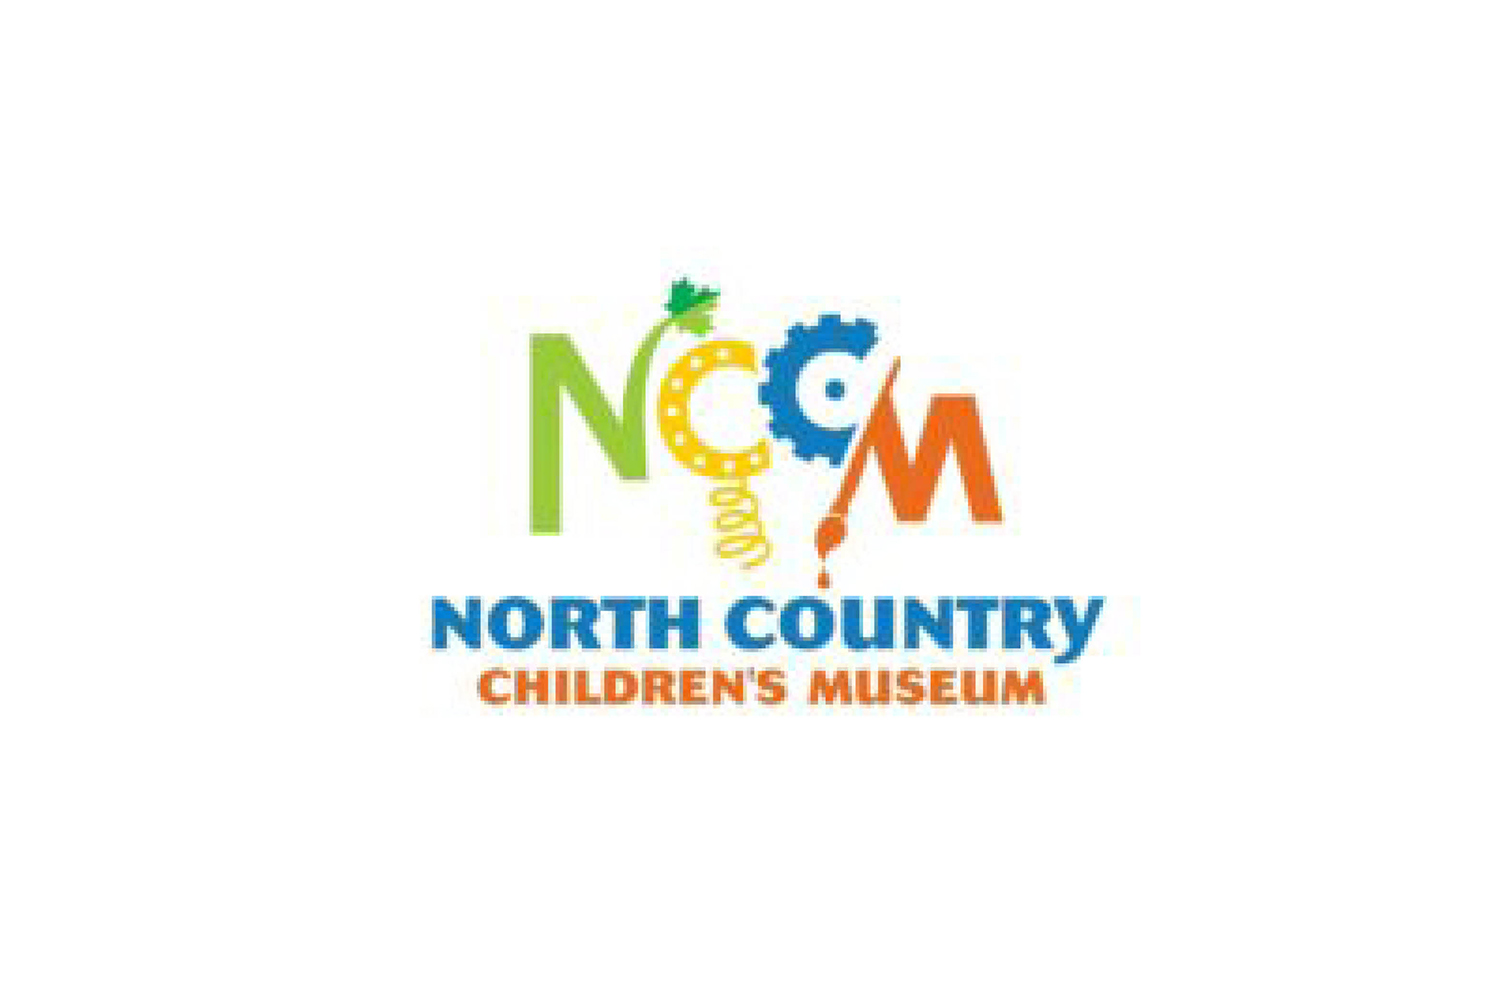 Boss_Display_Client_North_Country_Childrens_Museum_Logo.jpg